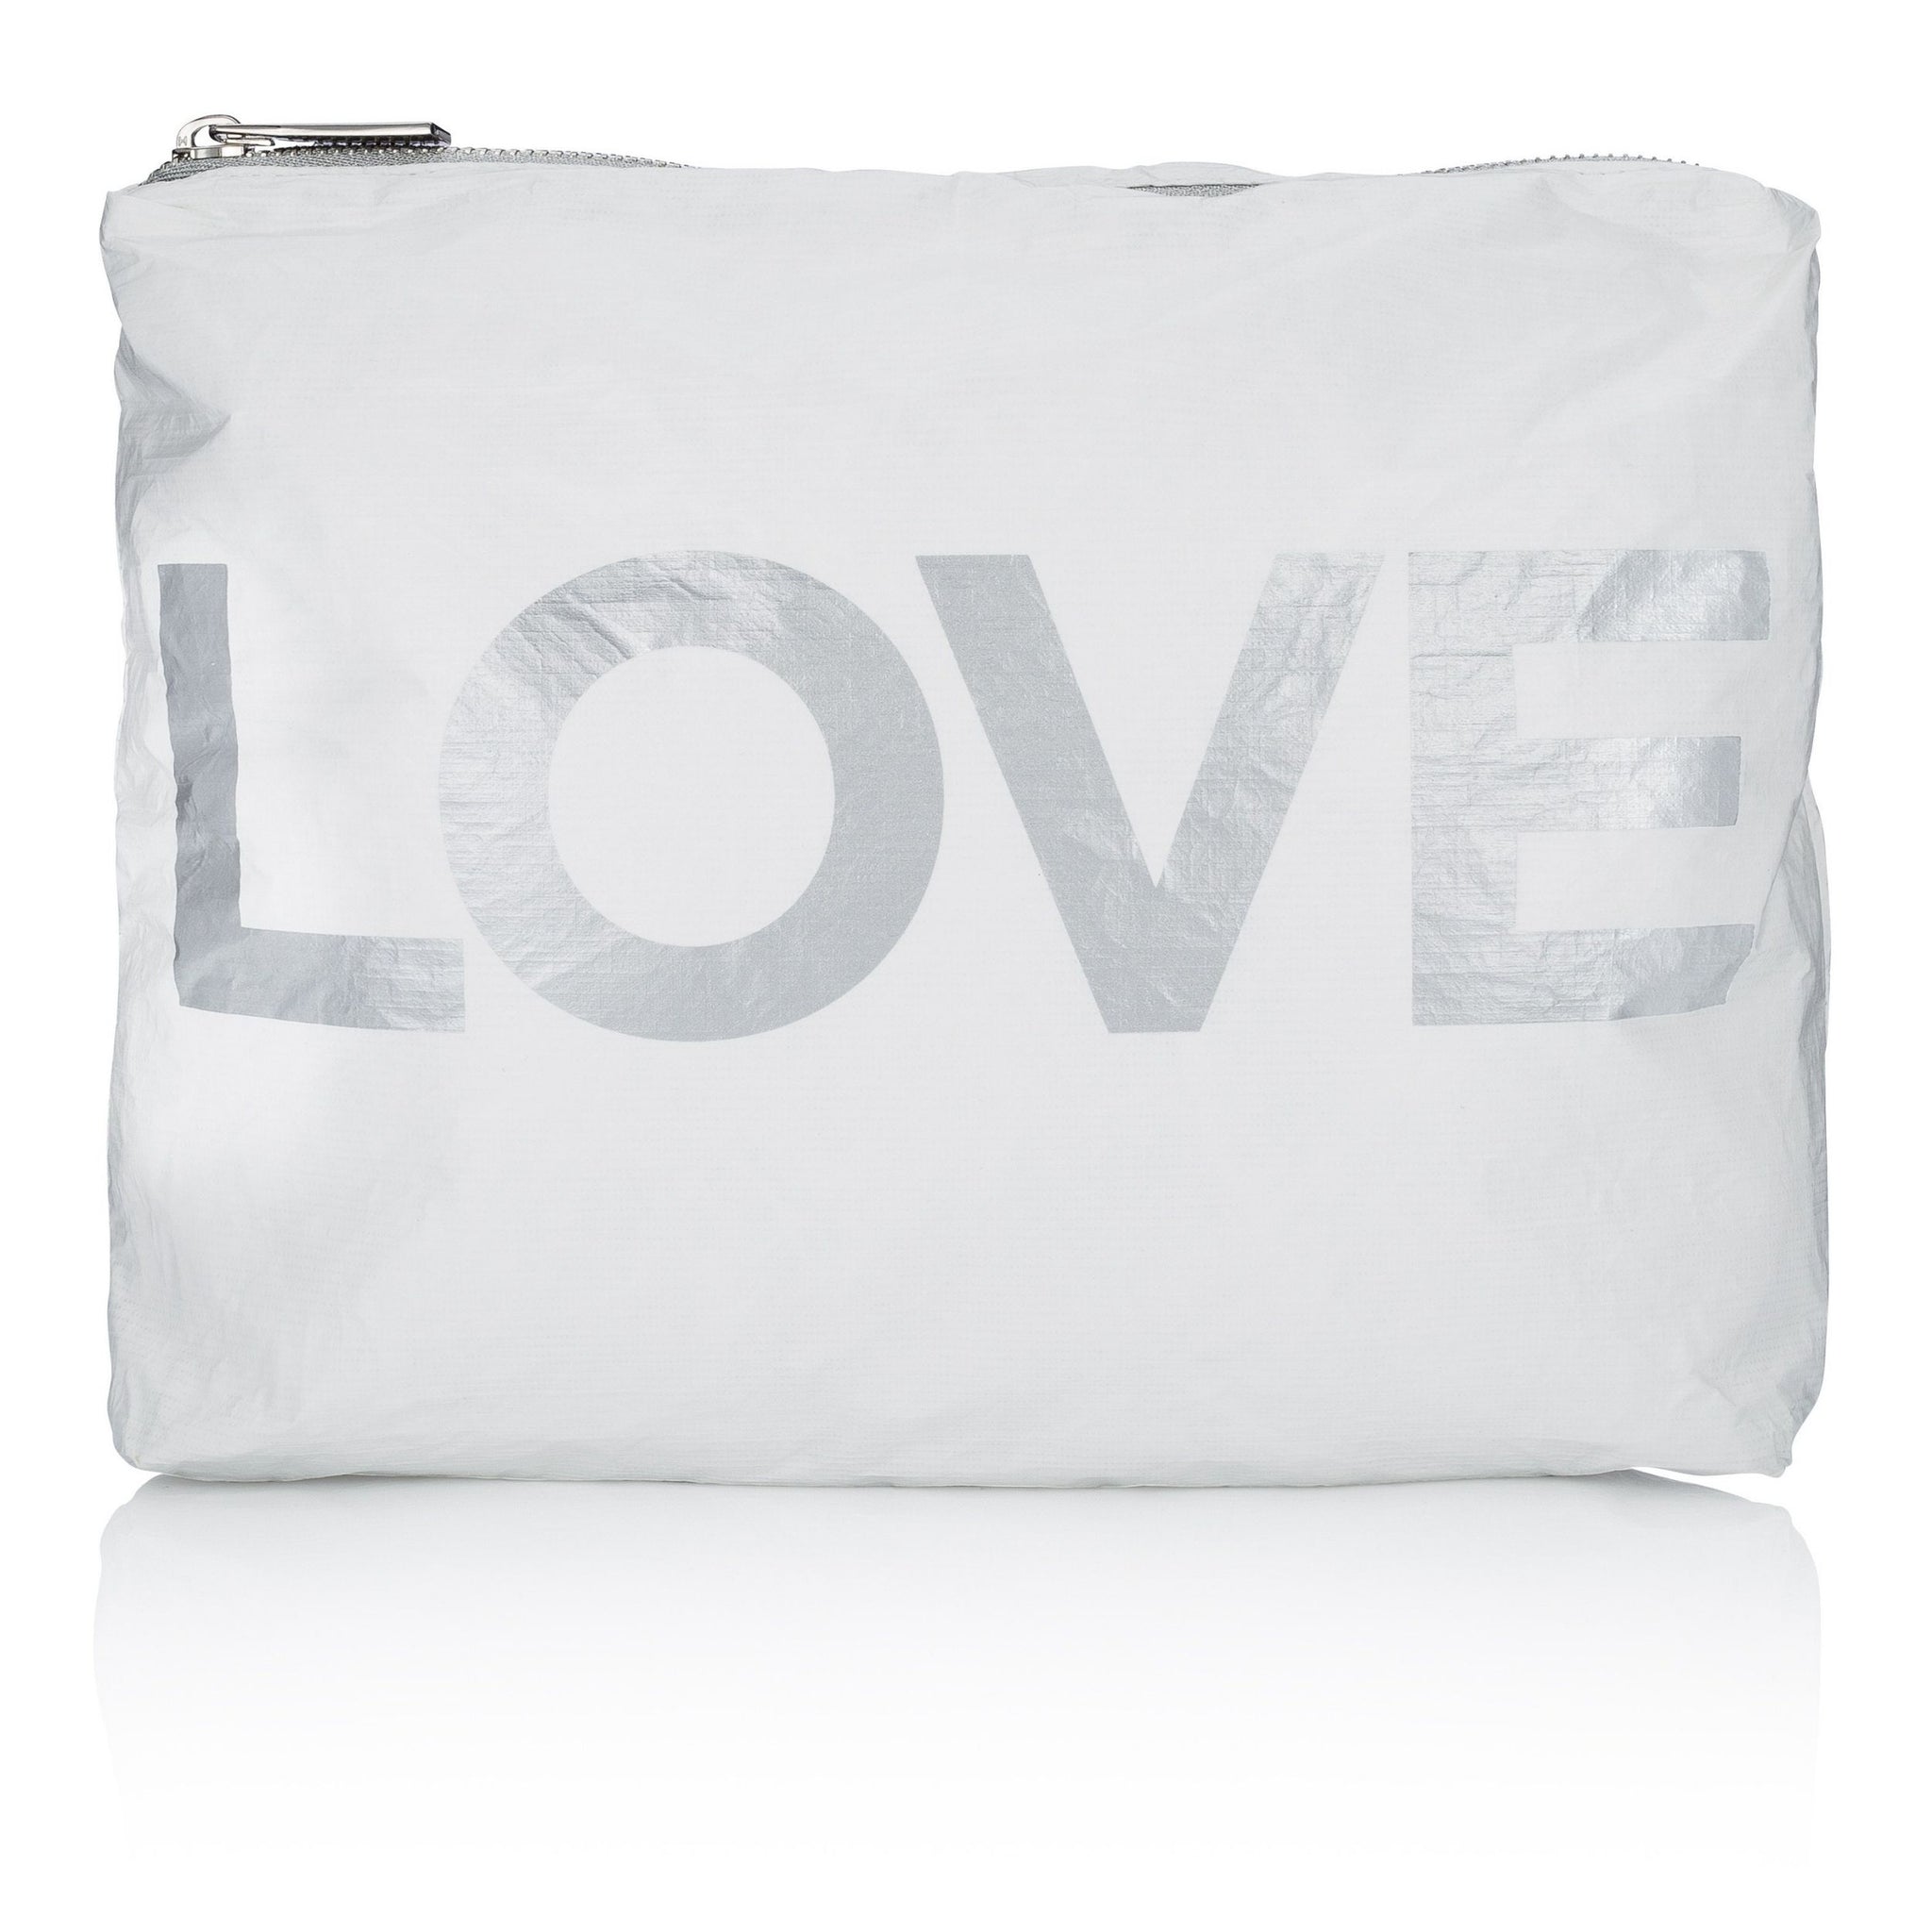 Medium Zipper Pack in Shimmer White with Silver "LOVE"